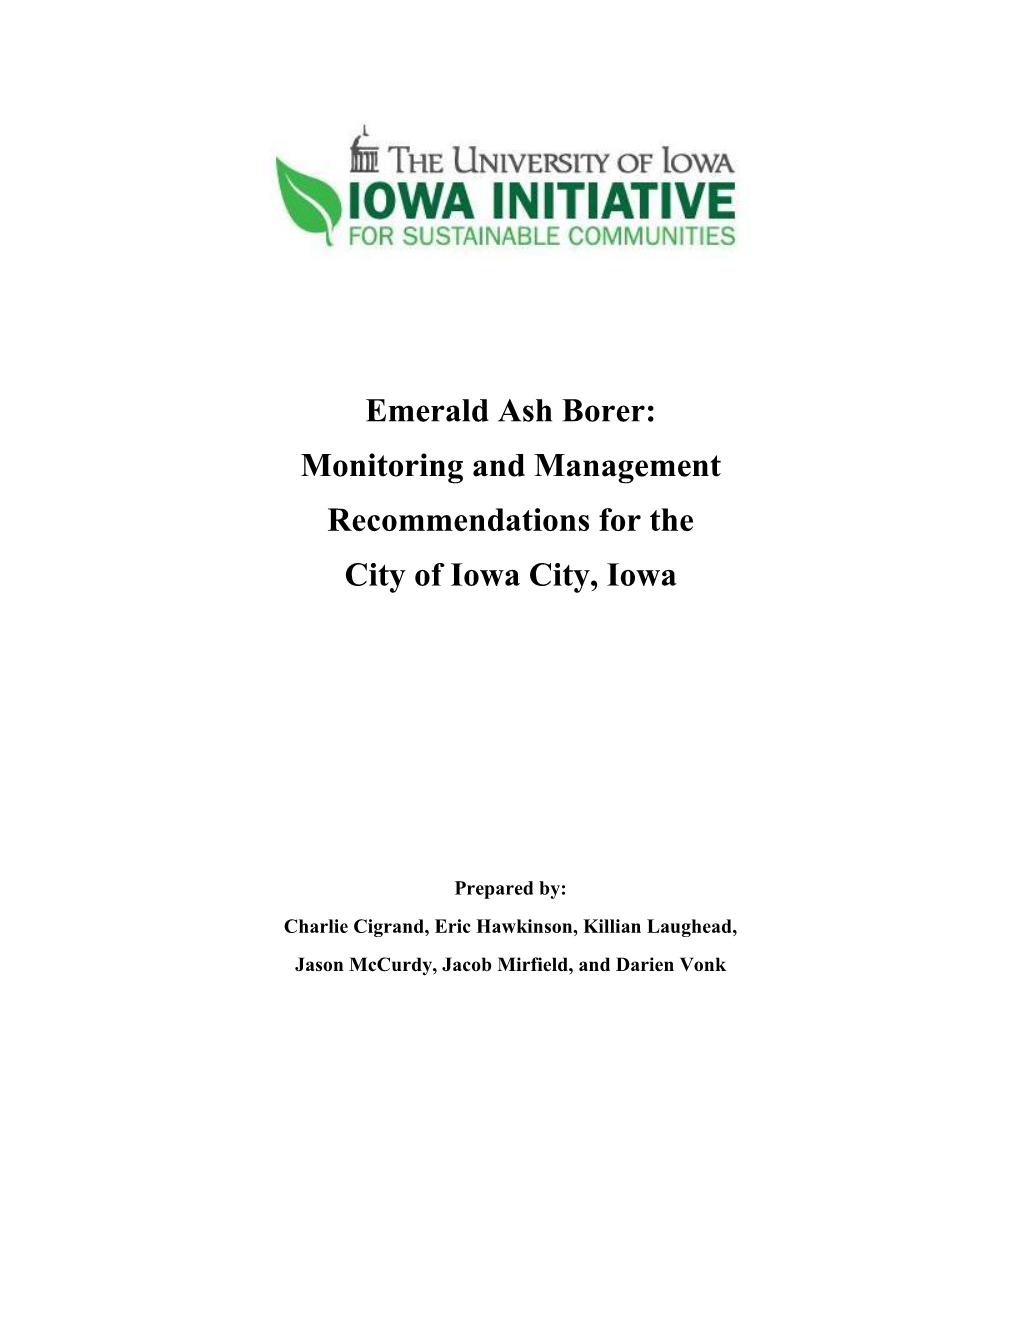 Emerald Ash Borer: Monitoring and Management Recommendations for the City of Iowa City, Iowa